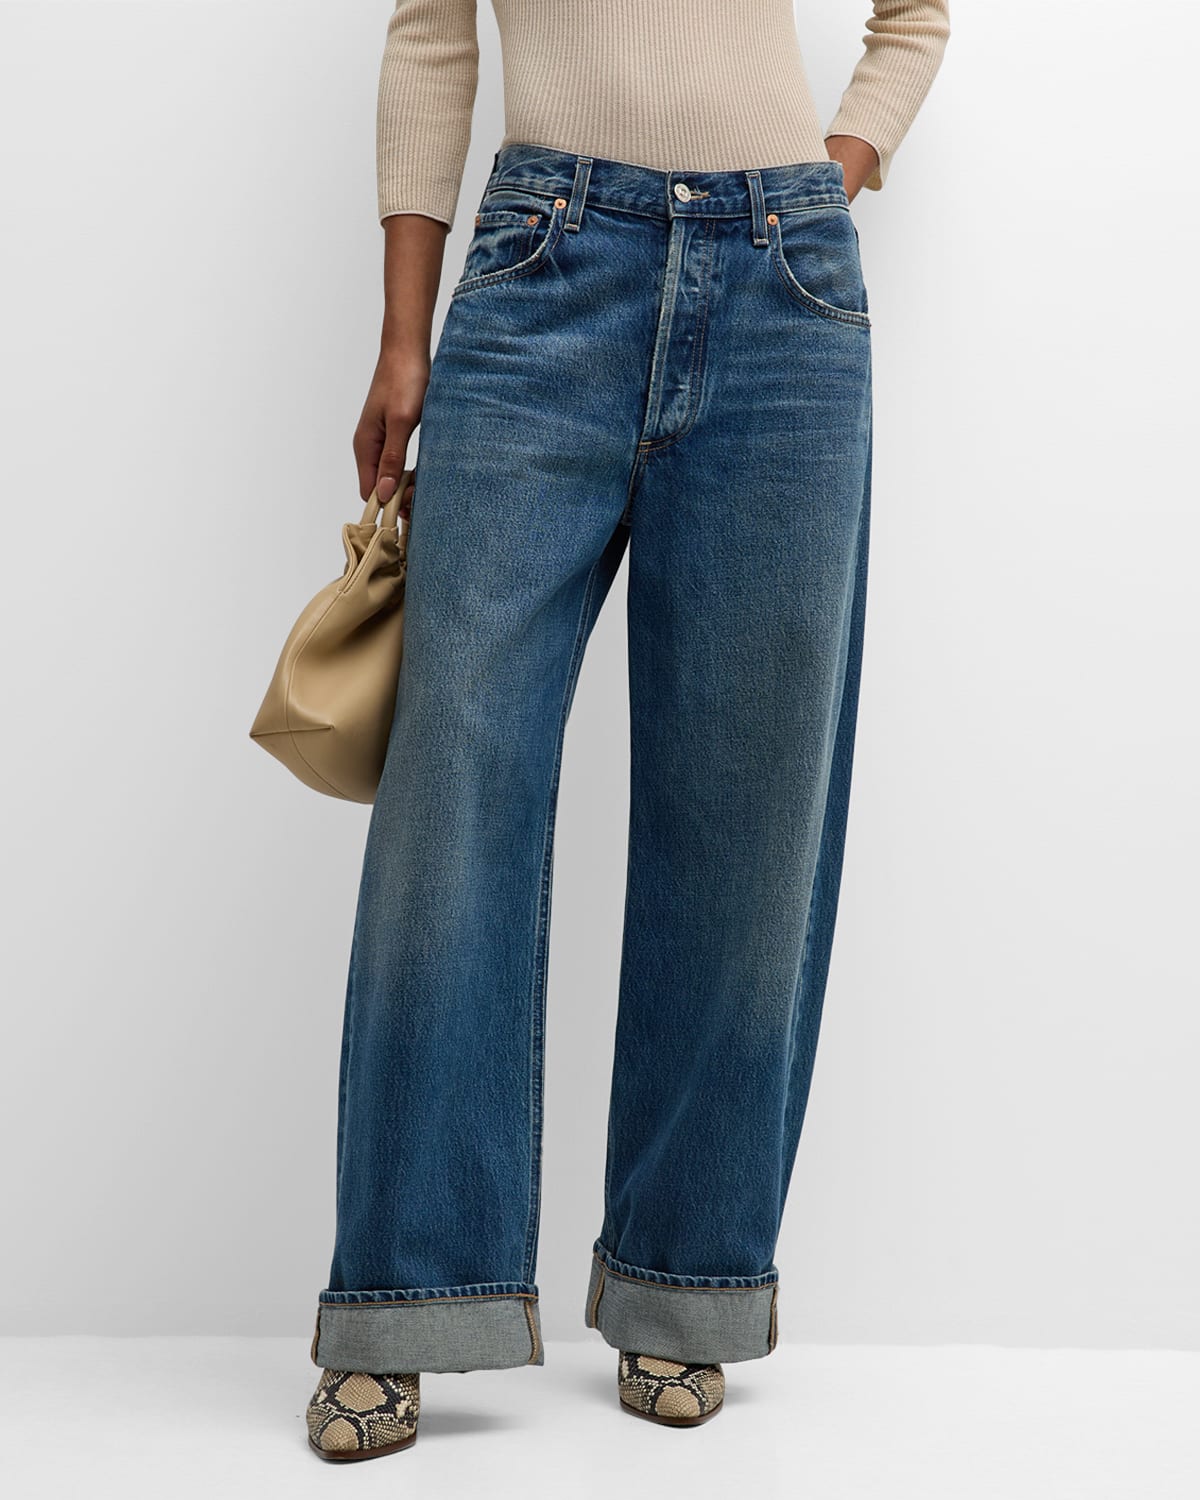 Citizens of Humanity Ayla Baggy Cuffed Crop Jeans | Neiman Marcus